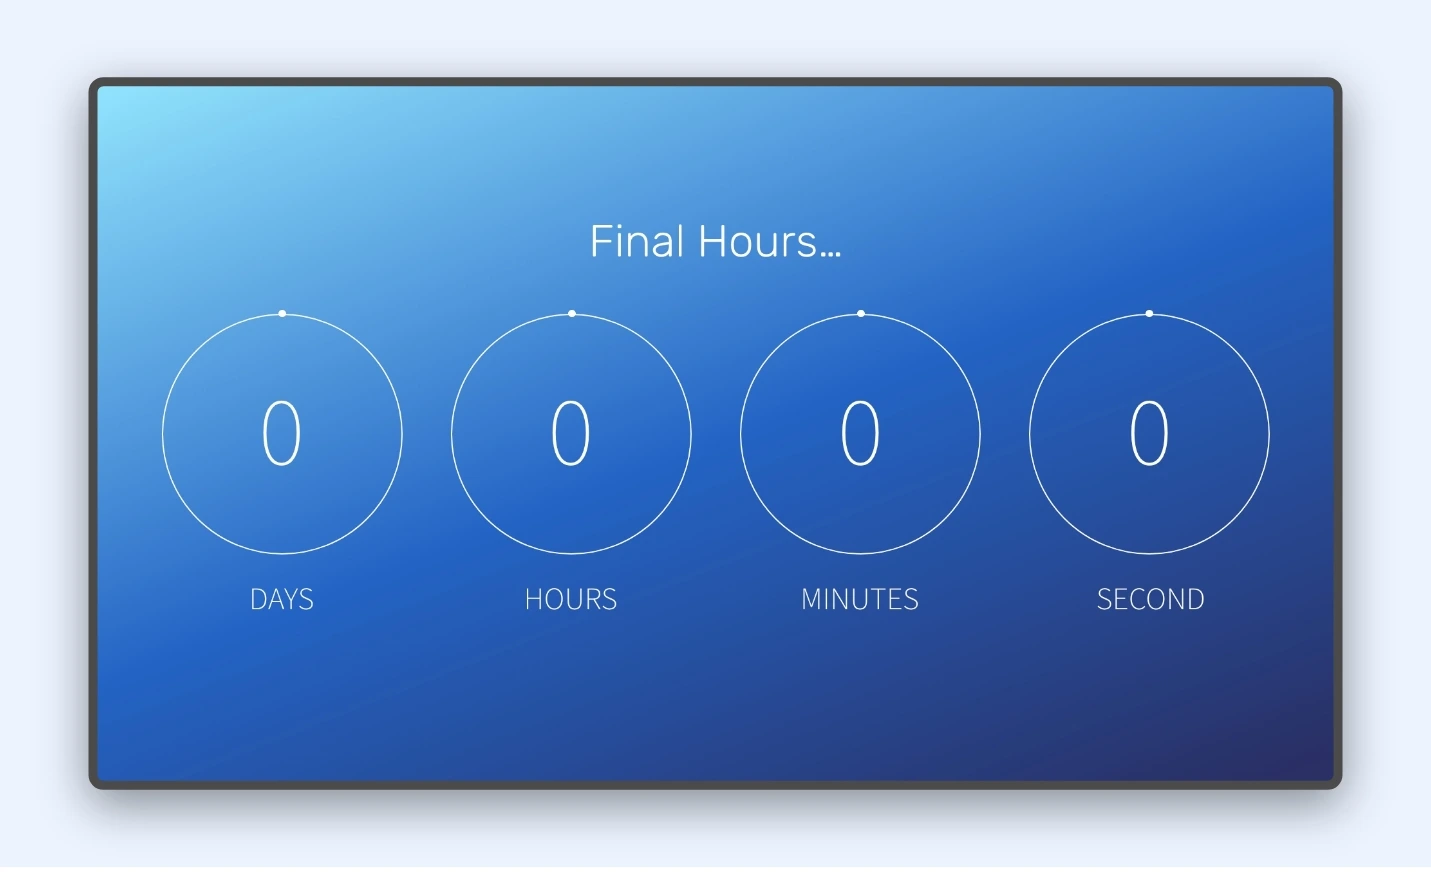 Countdown Timer app feed preview showing timer along custom text as Final Hours.